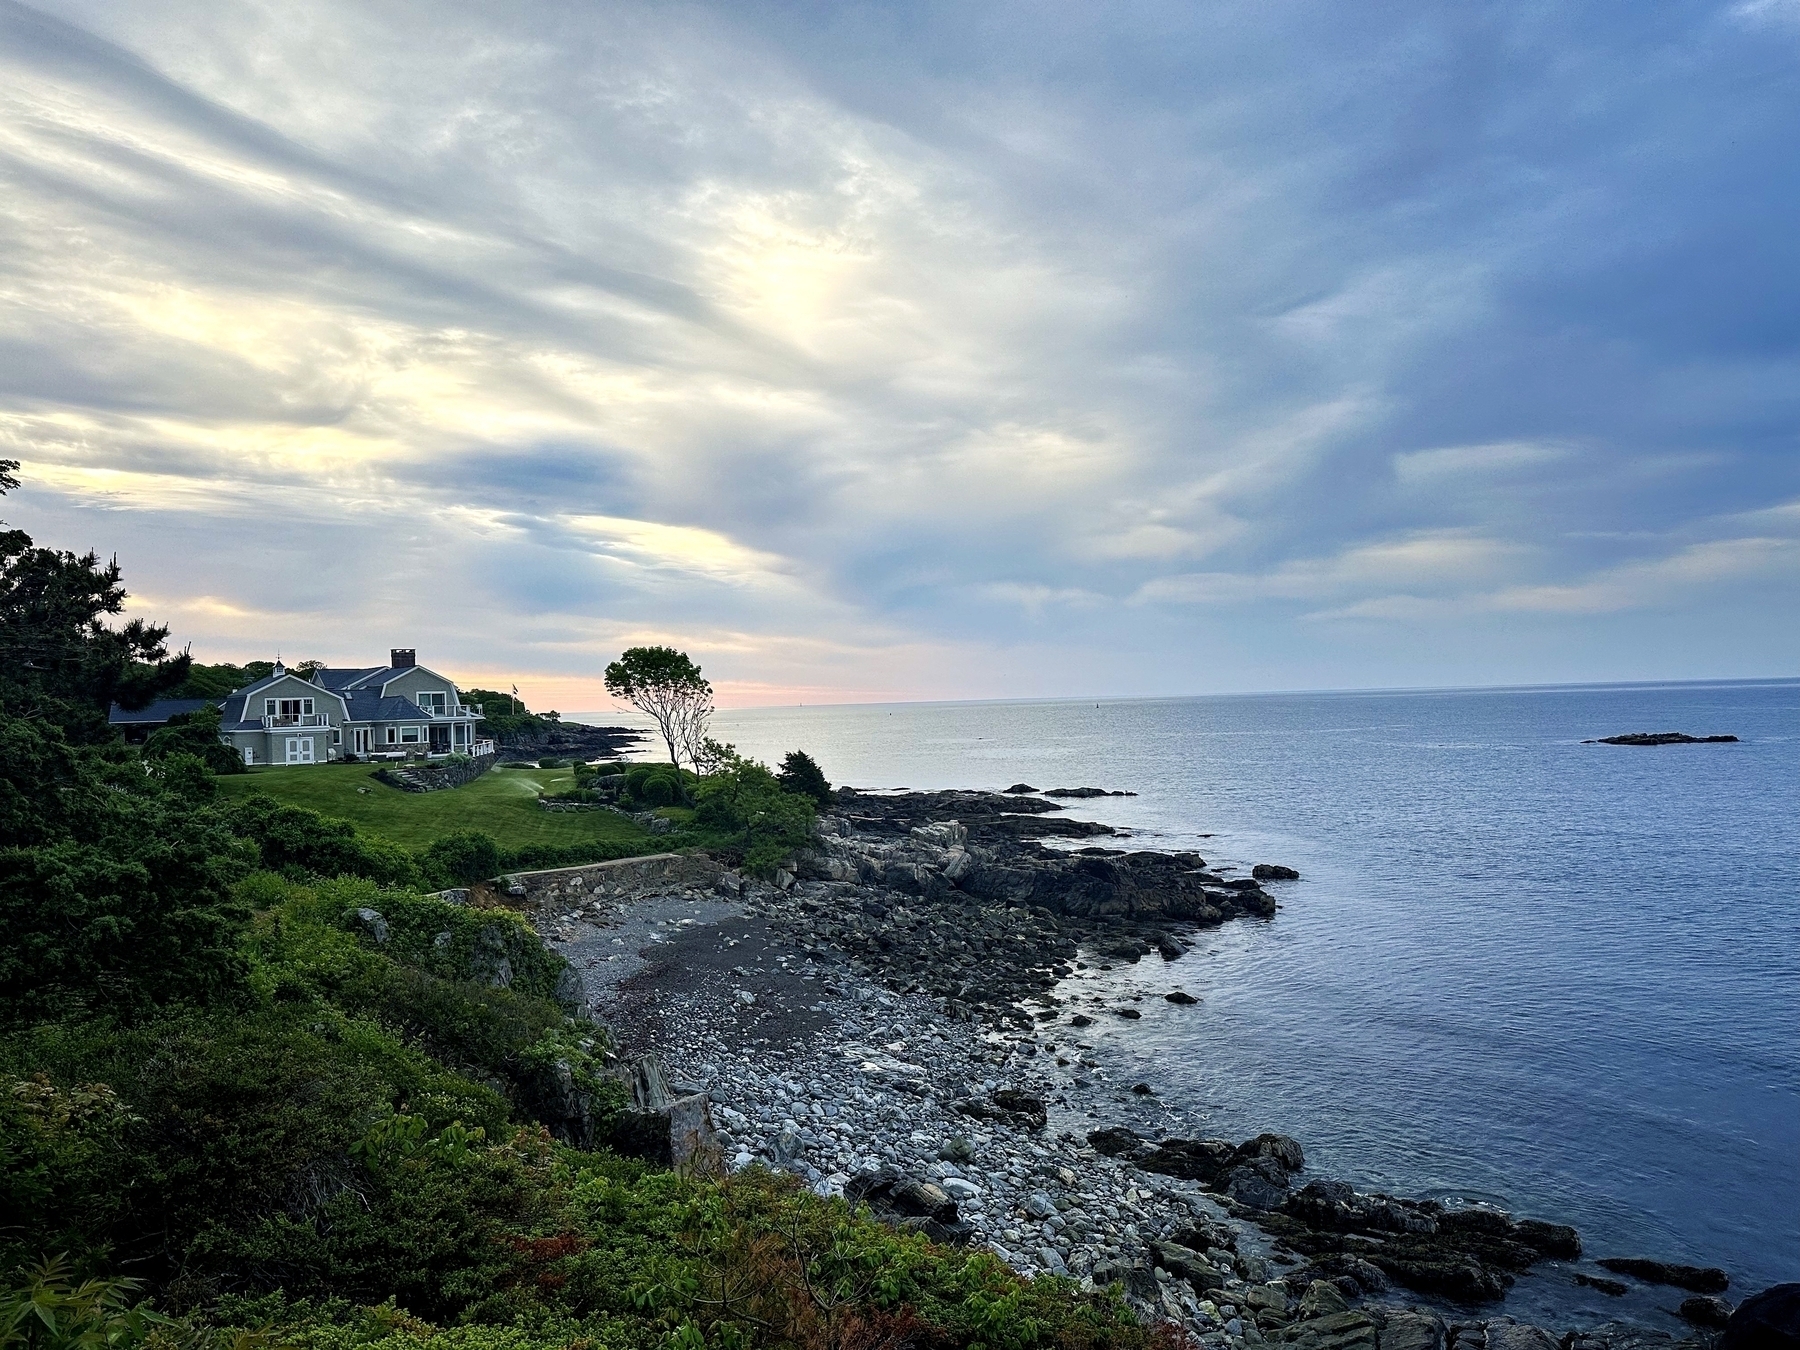 A house overlooks a rocky shoreline beside a calm ocean under a partly cloudy sky with blue and white hues.